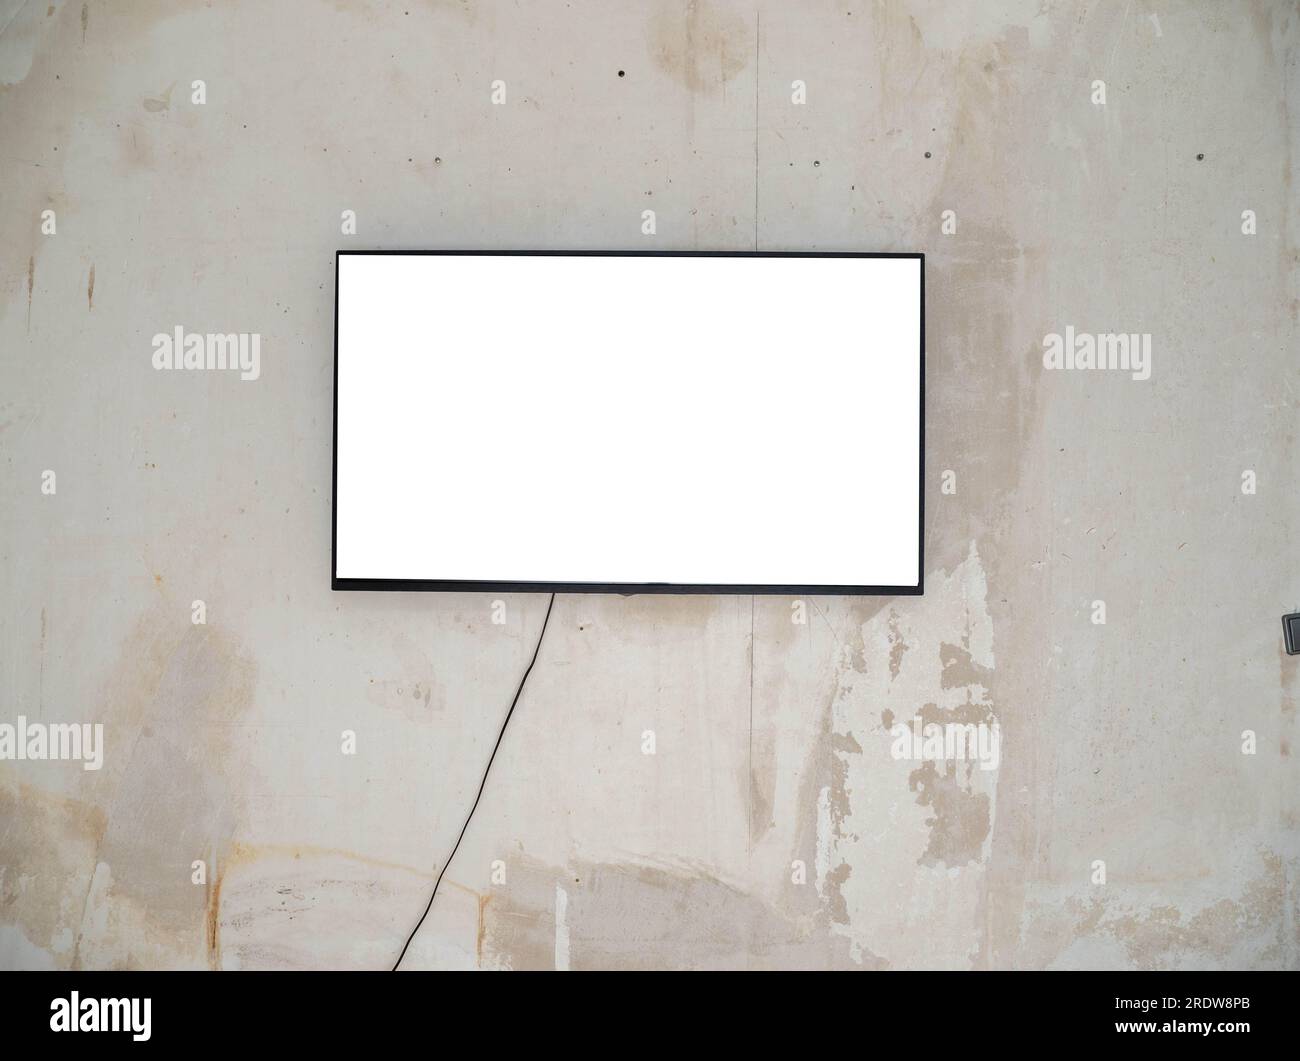 A wide white screen plasma TV in a black frame hangs on an old concrete wall. TV on a concrete wall. Stock Photo